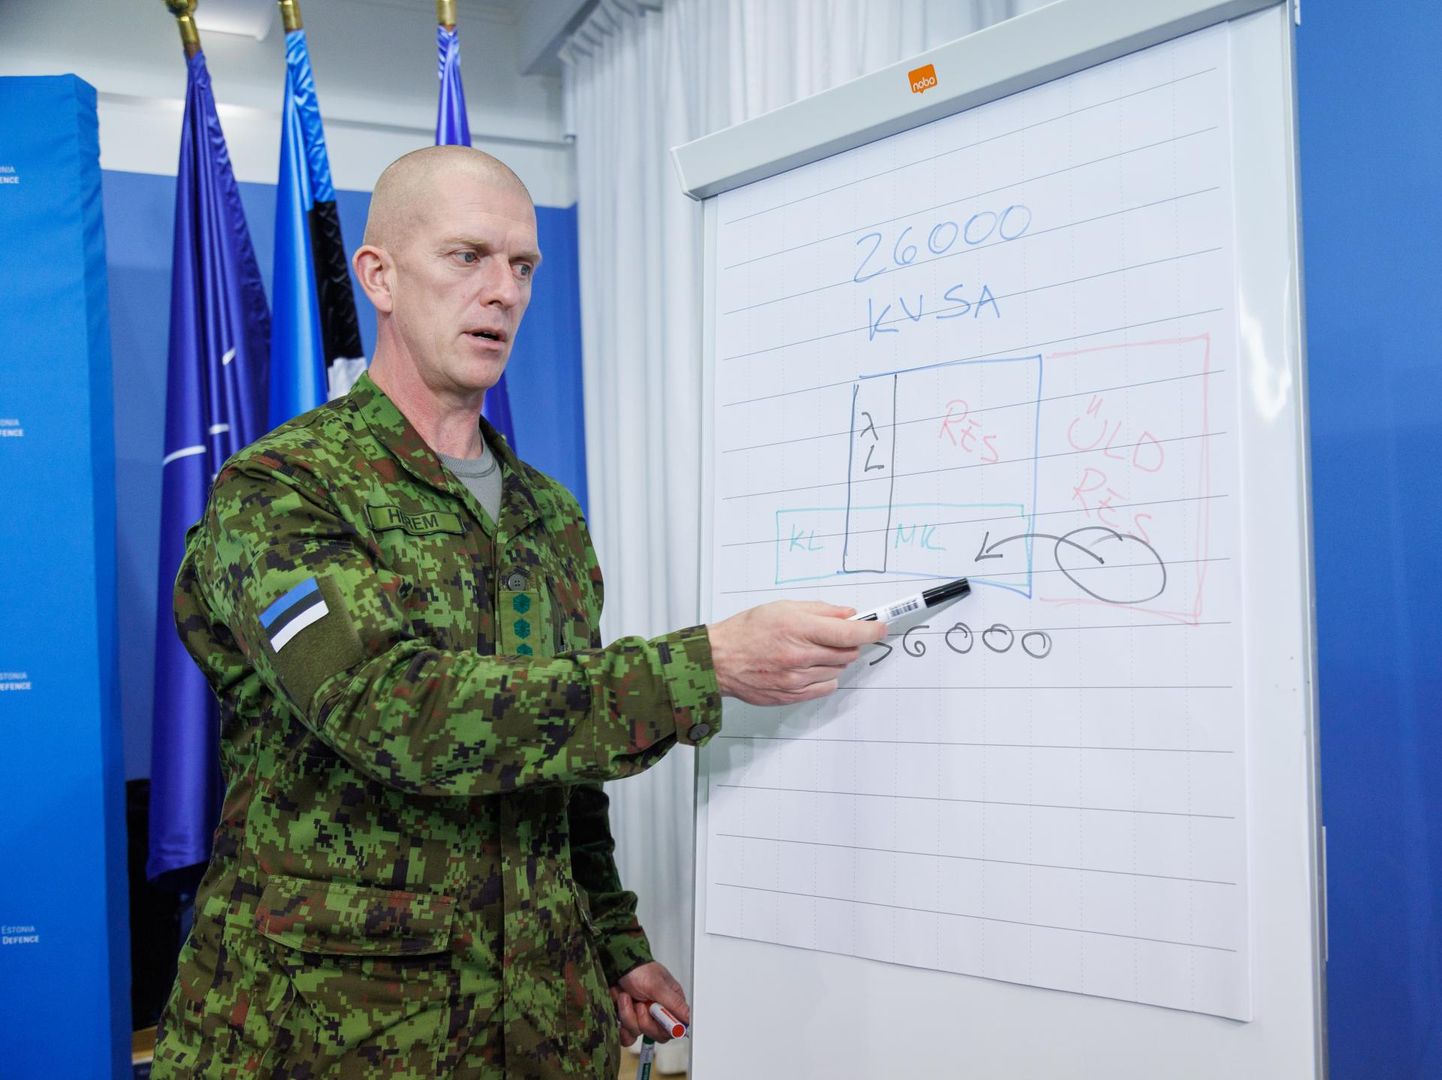 According to the head of the Defense Forces, Lieutenant General Martin Herem, reservists living in Tallinn have a greater chance of being assigned to a unit further away from their home.